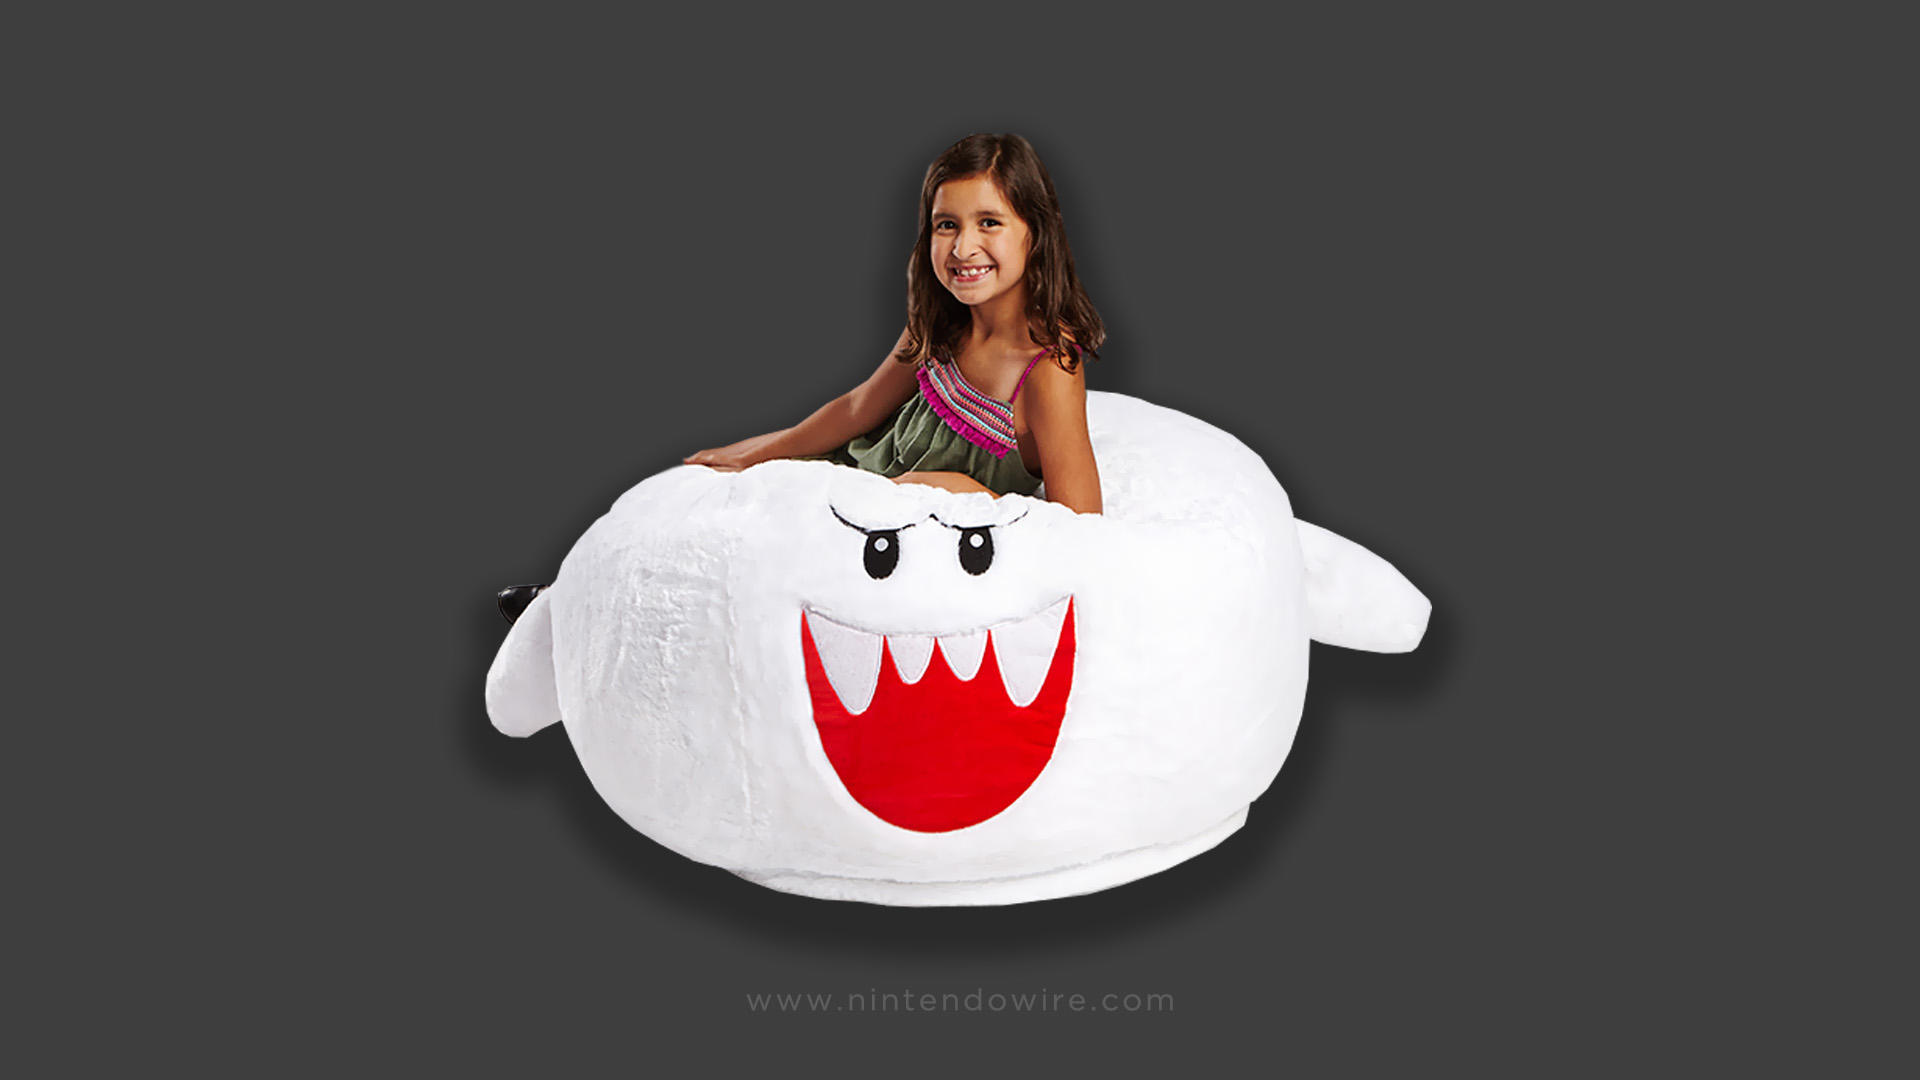 Check Out This Large Super Mario Boo Bean Bag Chair From Thinkgeek